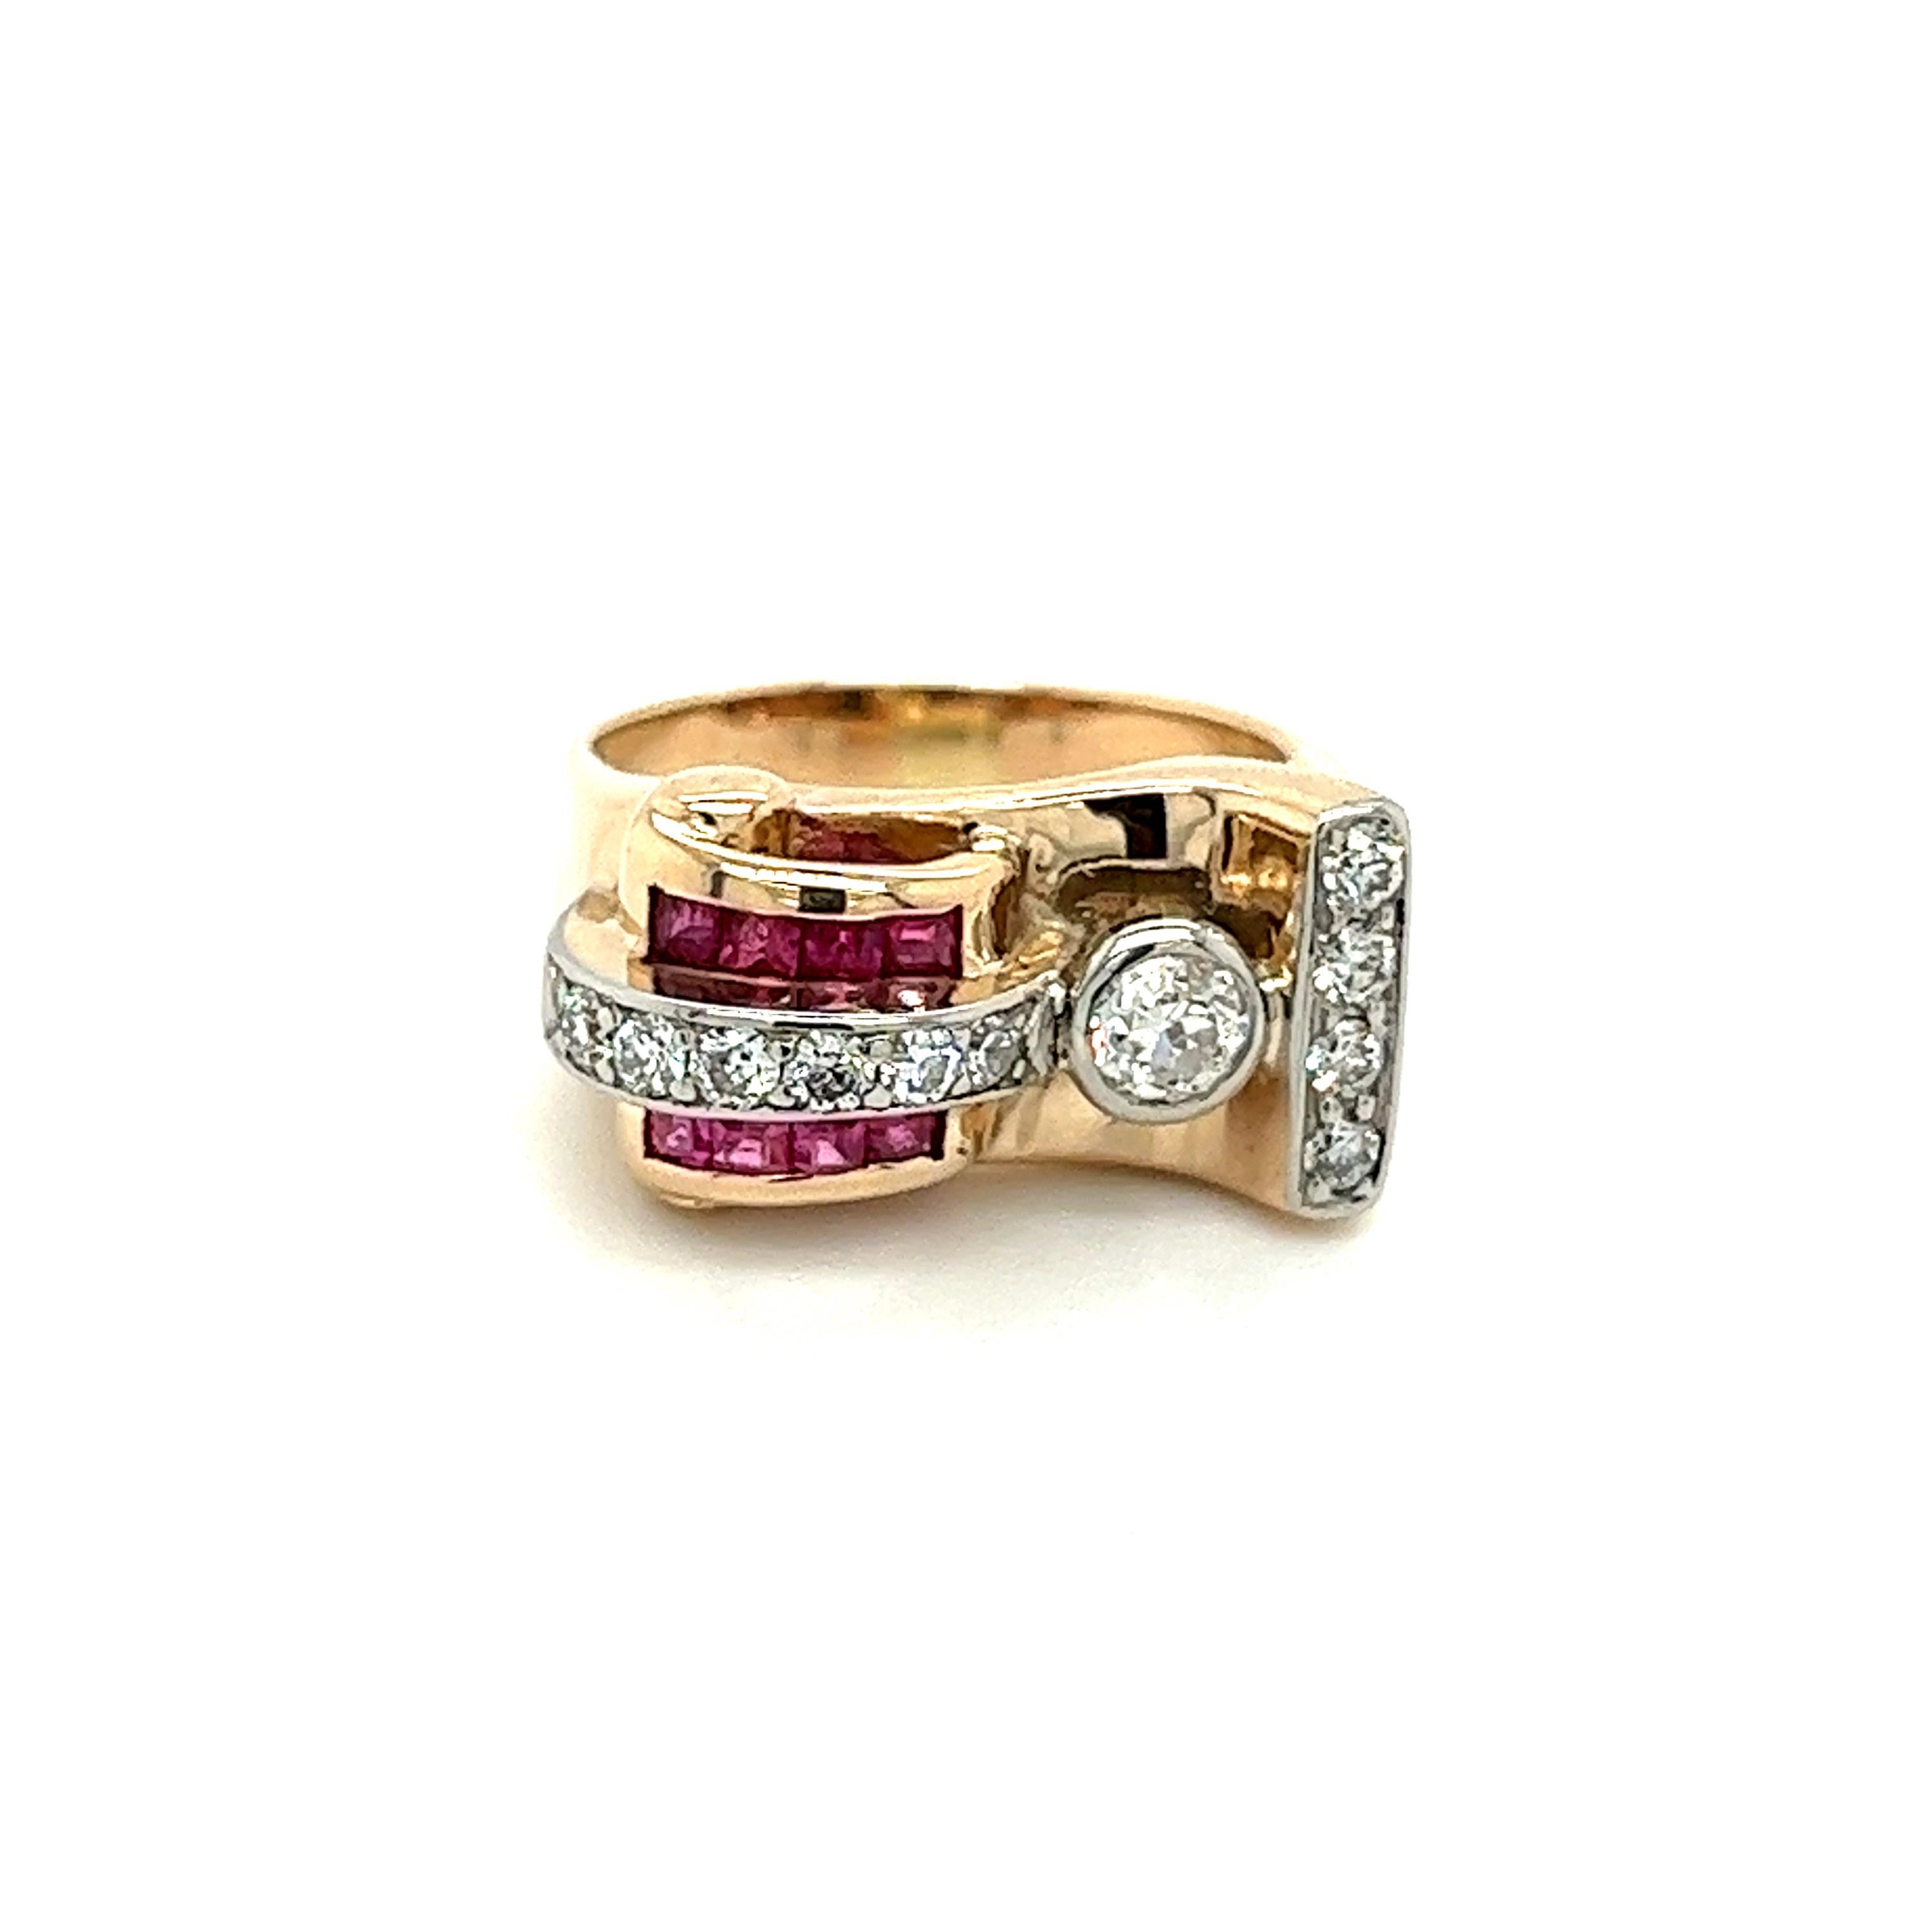 Vintage 14k Gold Retro Style Old Euro Cut Diamond and Baguette Cut Ruby Ring For Sale 1